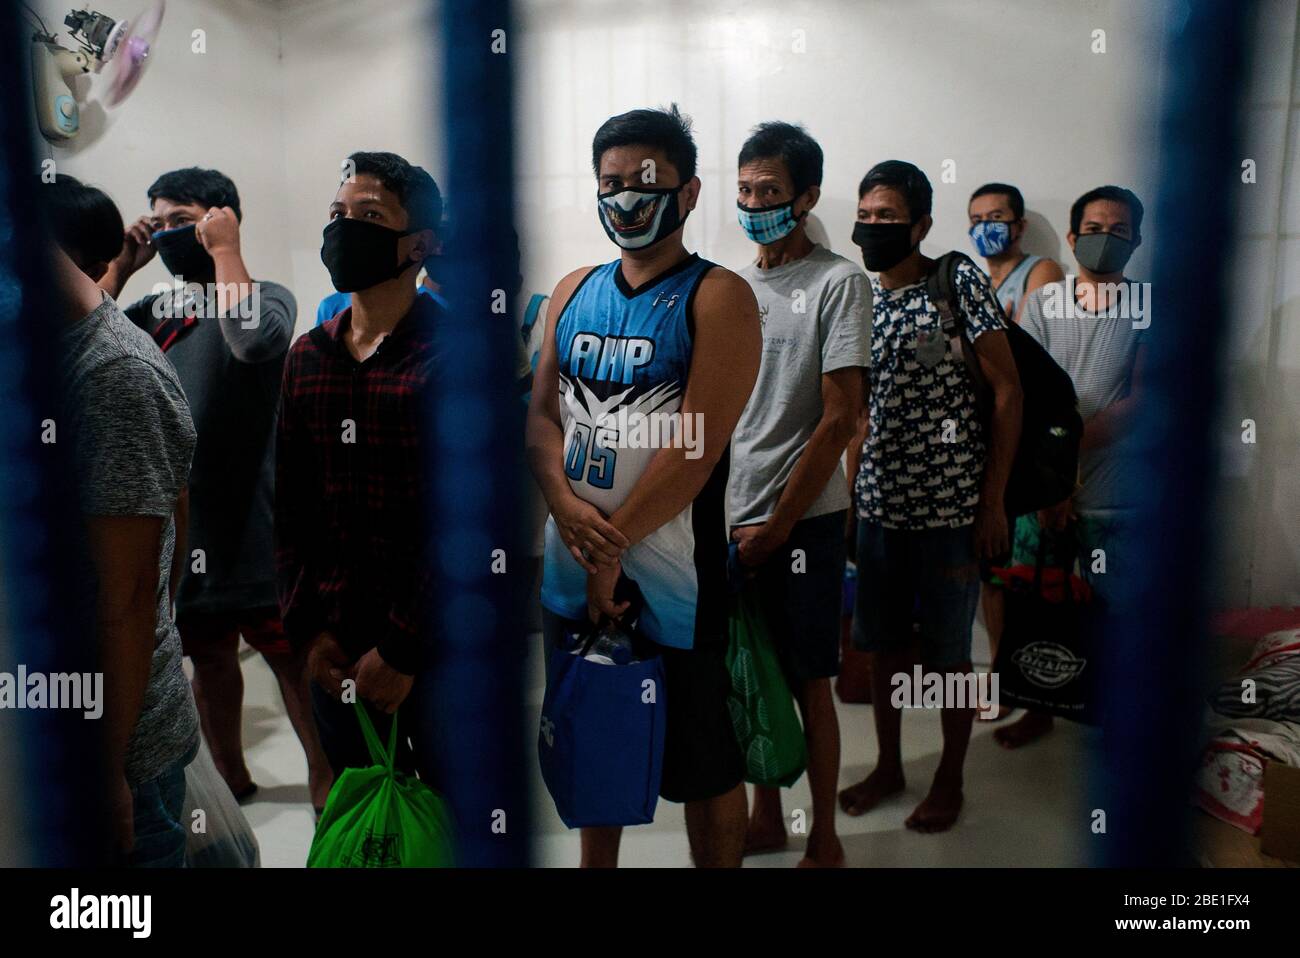 April 6, 2020 - Manila, Philippines: Detainees from Sitio San Roque, Quezon City await to be released on bail from Camp Karingal's detention center on April 6, 2020. Twenty-one residents were arrested for illegal assembly during an emergency health crisis during the enhanced community quarantine in Metro Manila to fight spread of COVID-19. On April 1, 2020, residents of Sitio San Roque gathered together to protest failings of the Duterte administration and local government to provide sufficient relief goods to their community. After a 15-minute warning, the Quezon City Police violently dispers Stock Photo